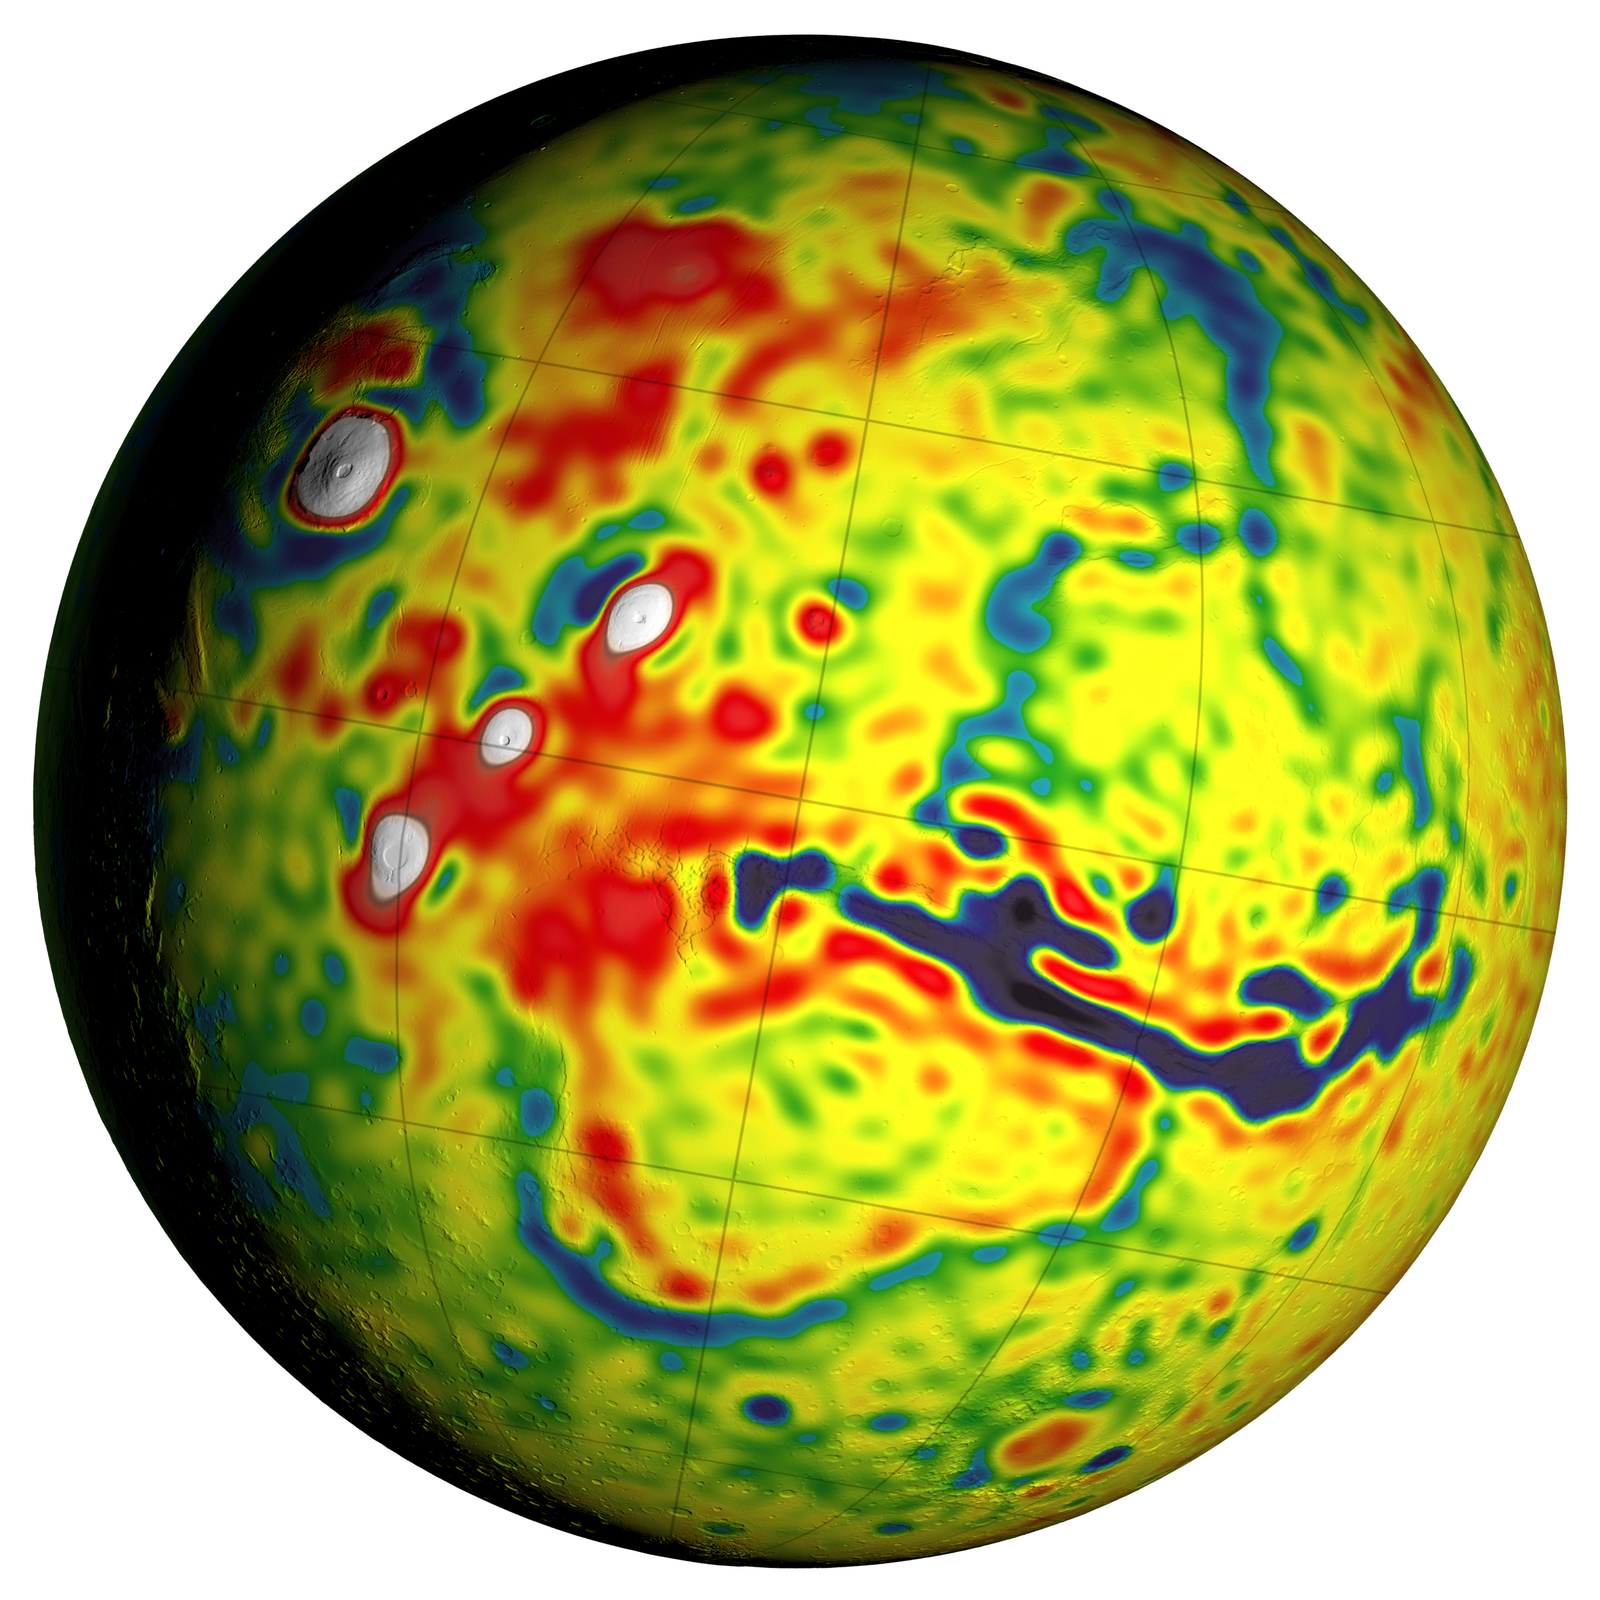 This map shows unprecedented detail of local variations in Mars' gravitational pull on orbiters. The gravitational mapping has been applied to map variations in the thickness of the planet's crust and to deduce information about its deeper interior.